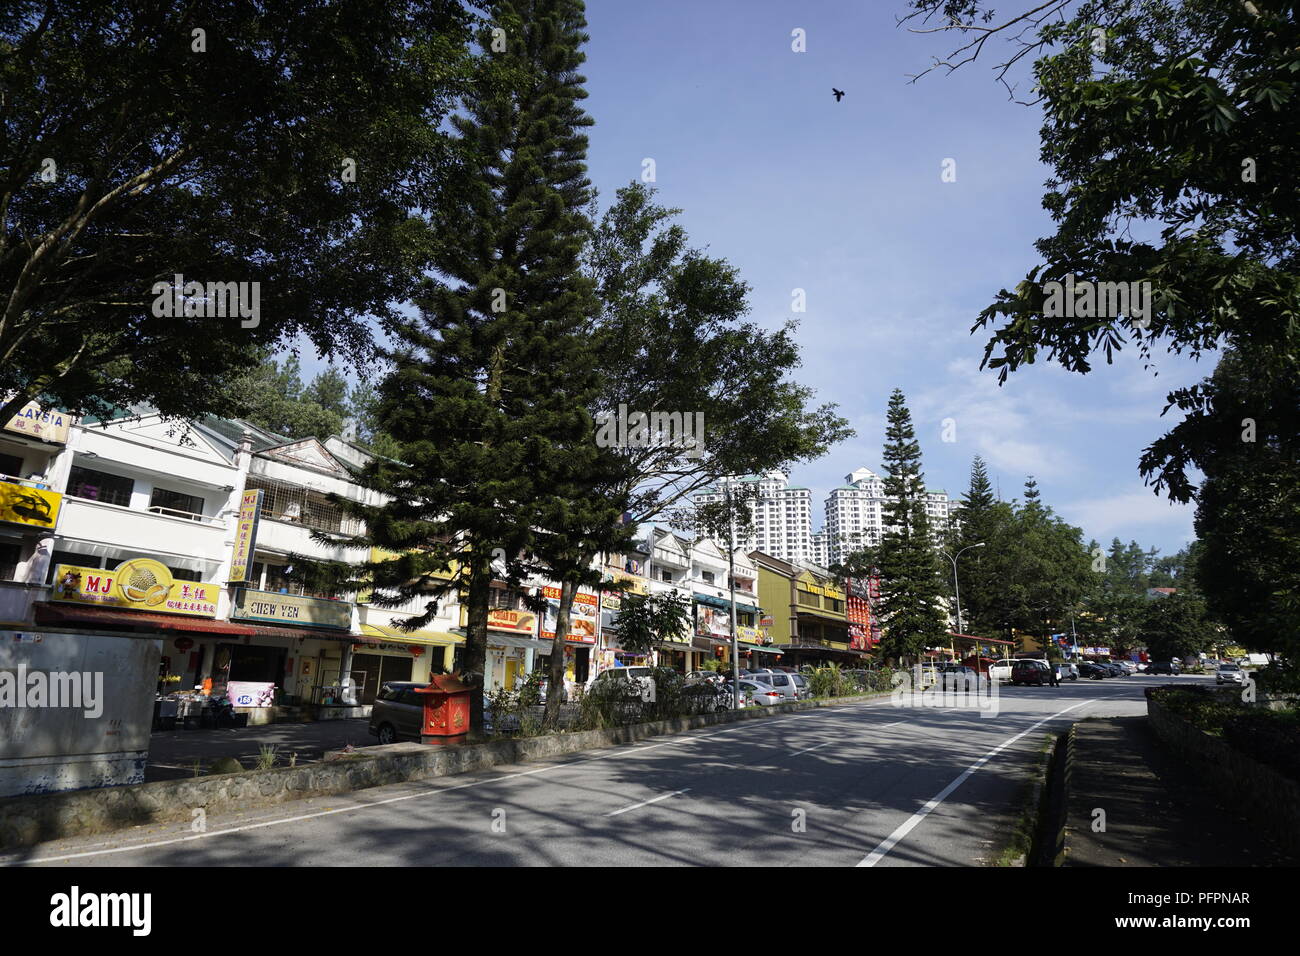 row of shops, mostly restaurants, at Gohtong Jaya, a satellite town of Genting Highlands, Malaysia Stock Photo